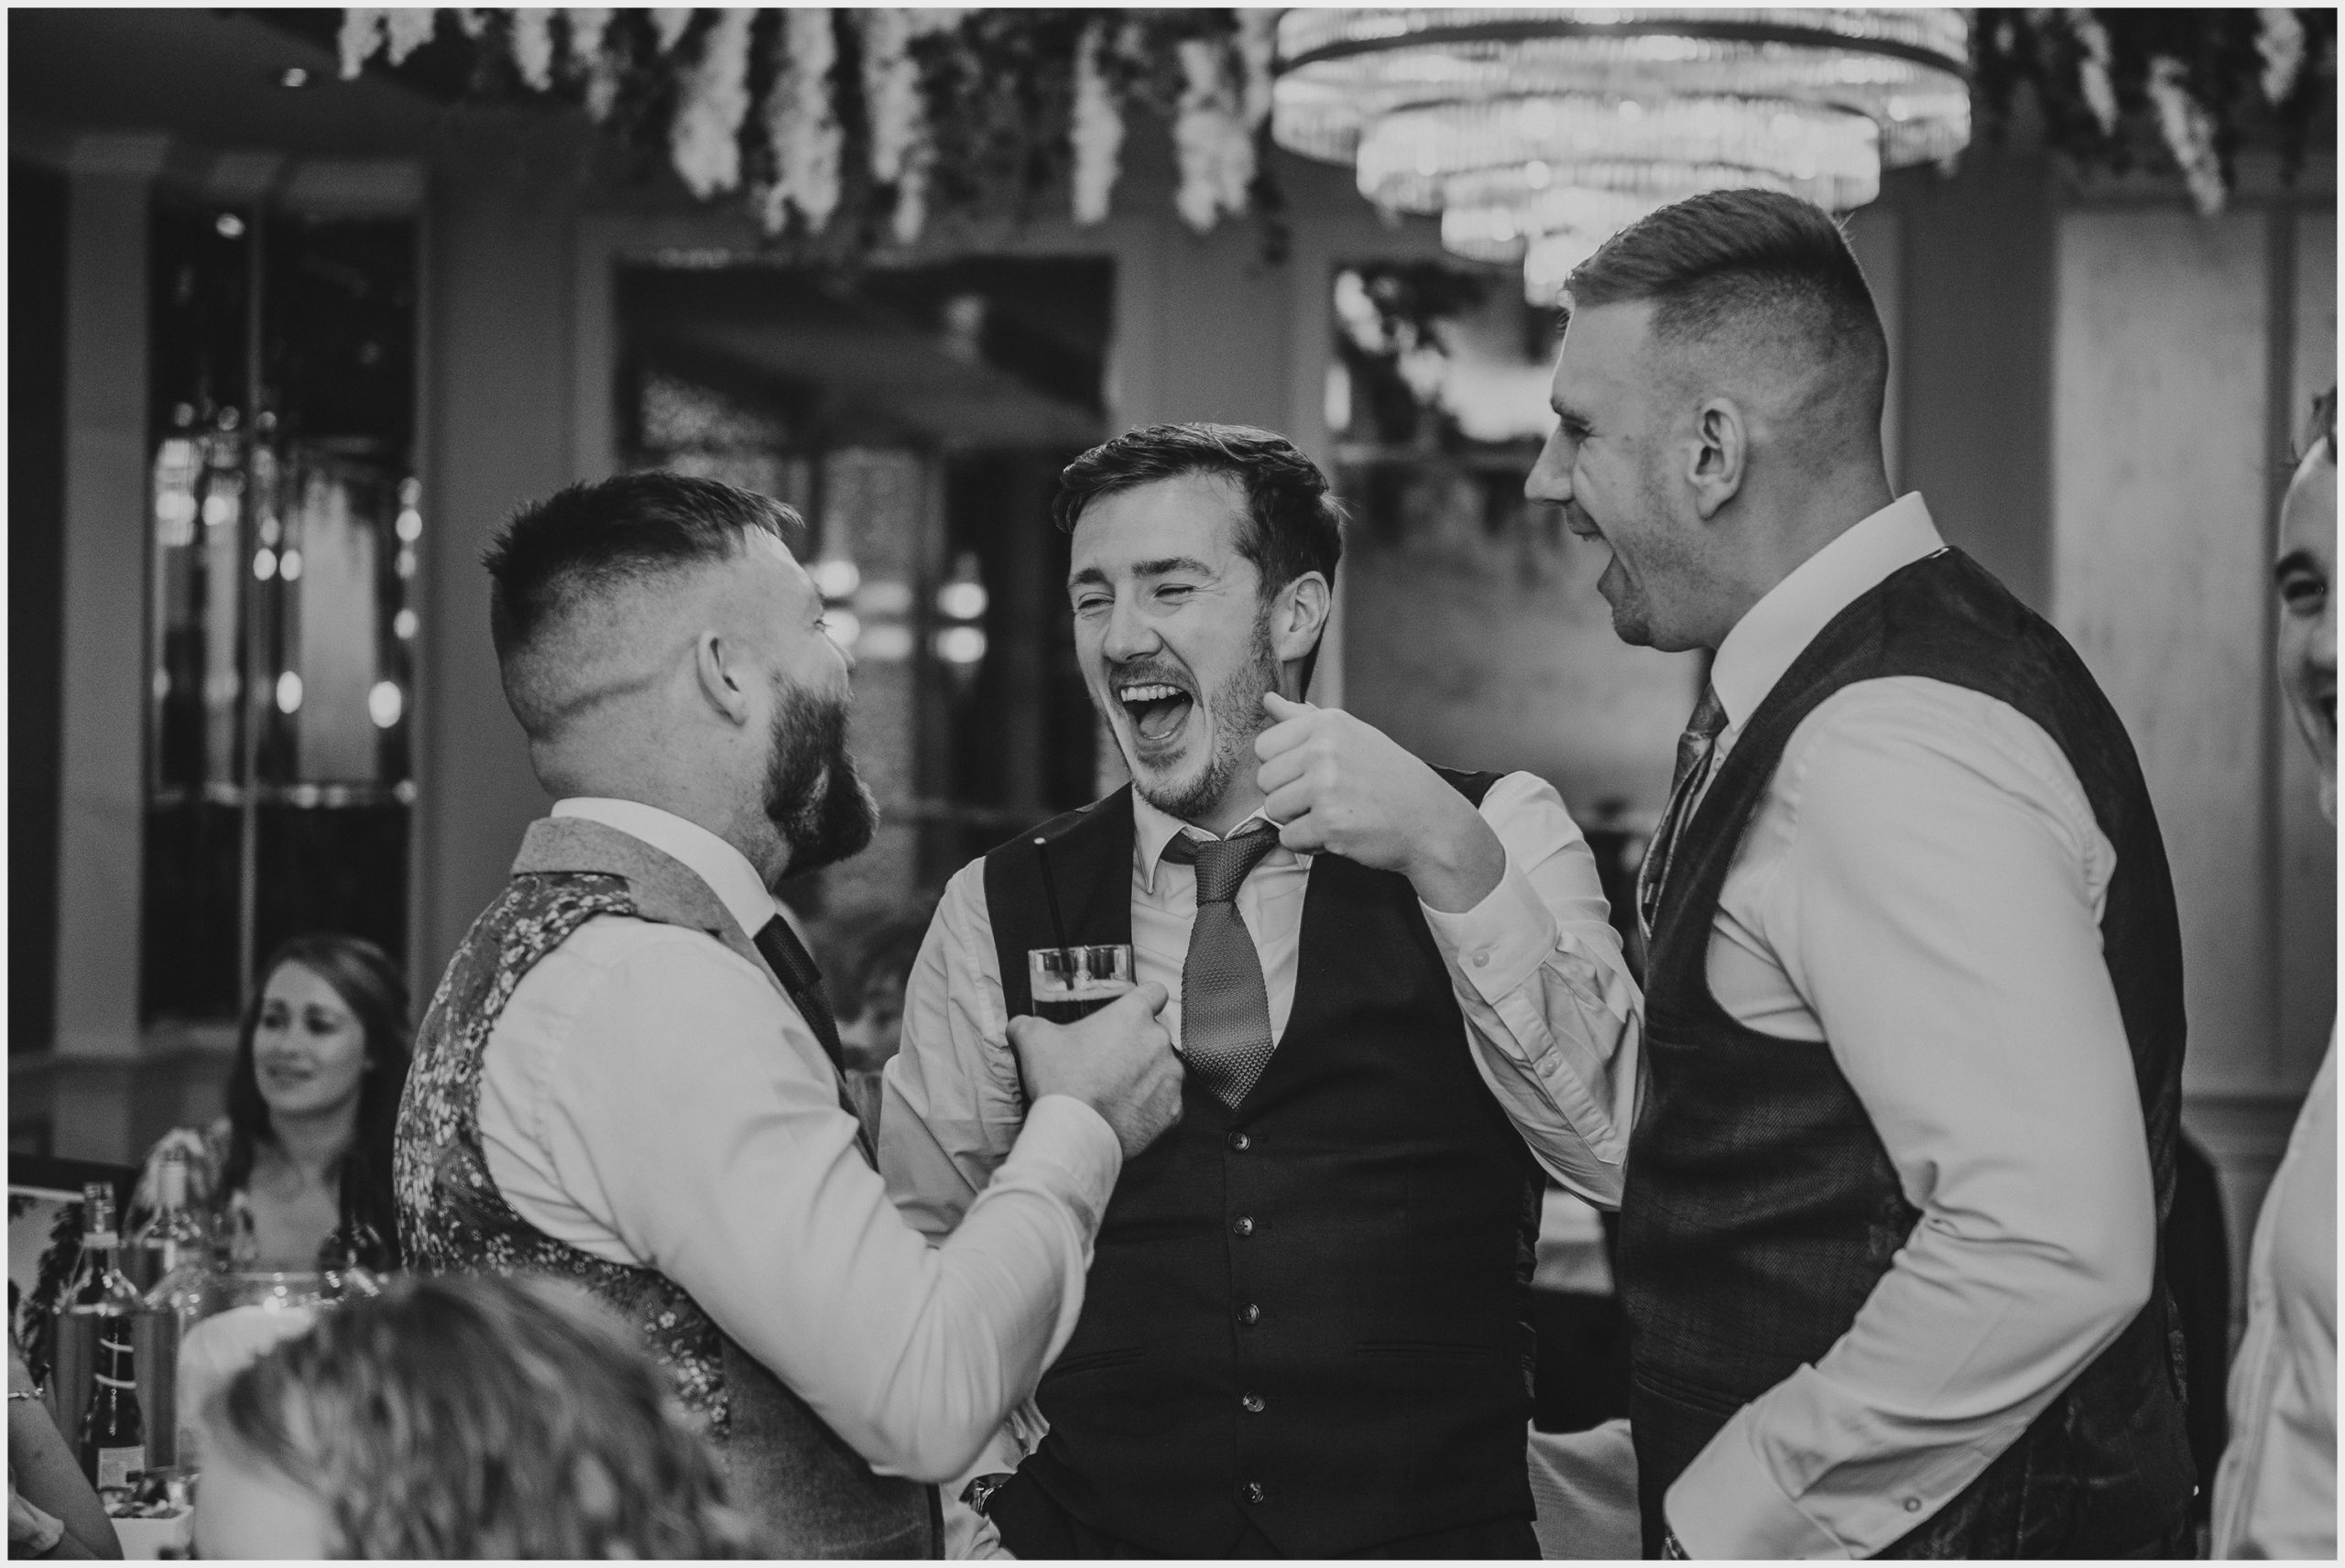 Guests joke and laugh during the wedding reception at The Grosvenor Pulford Hotel and Spa.  Image taken by Chester based wedding photographer Helena Jayne Photography